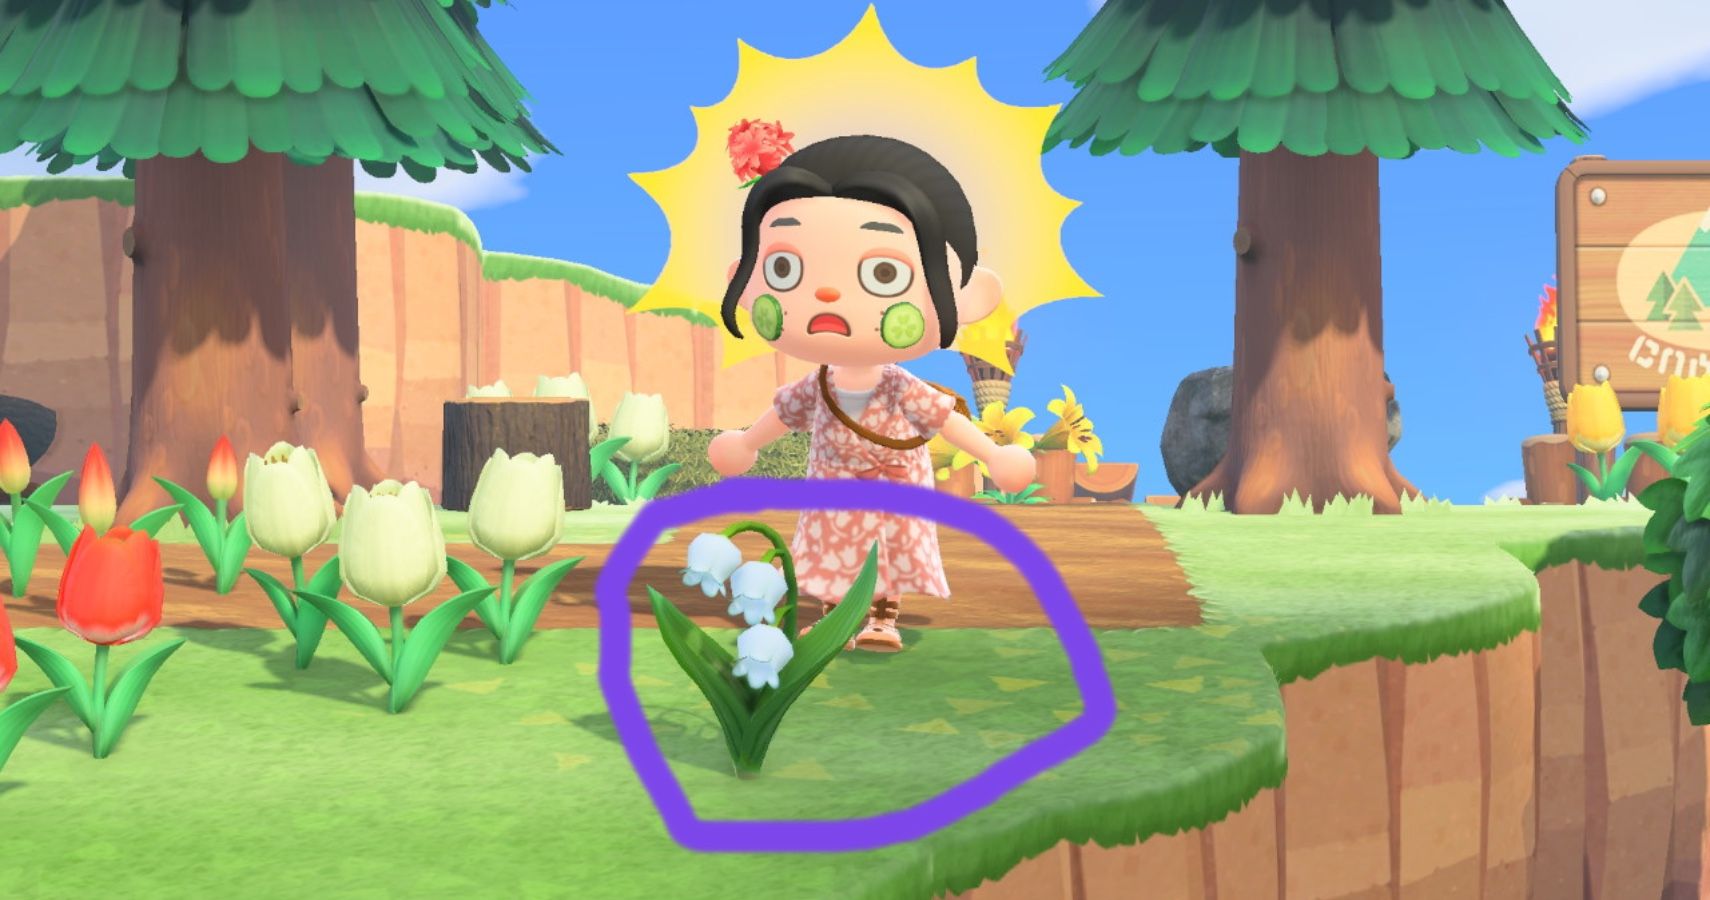 Player with Lilly of the Valley flower from Animal Crossing.